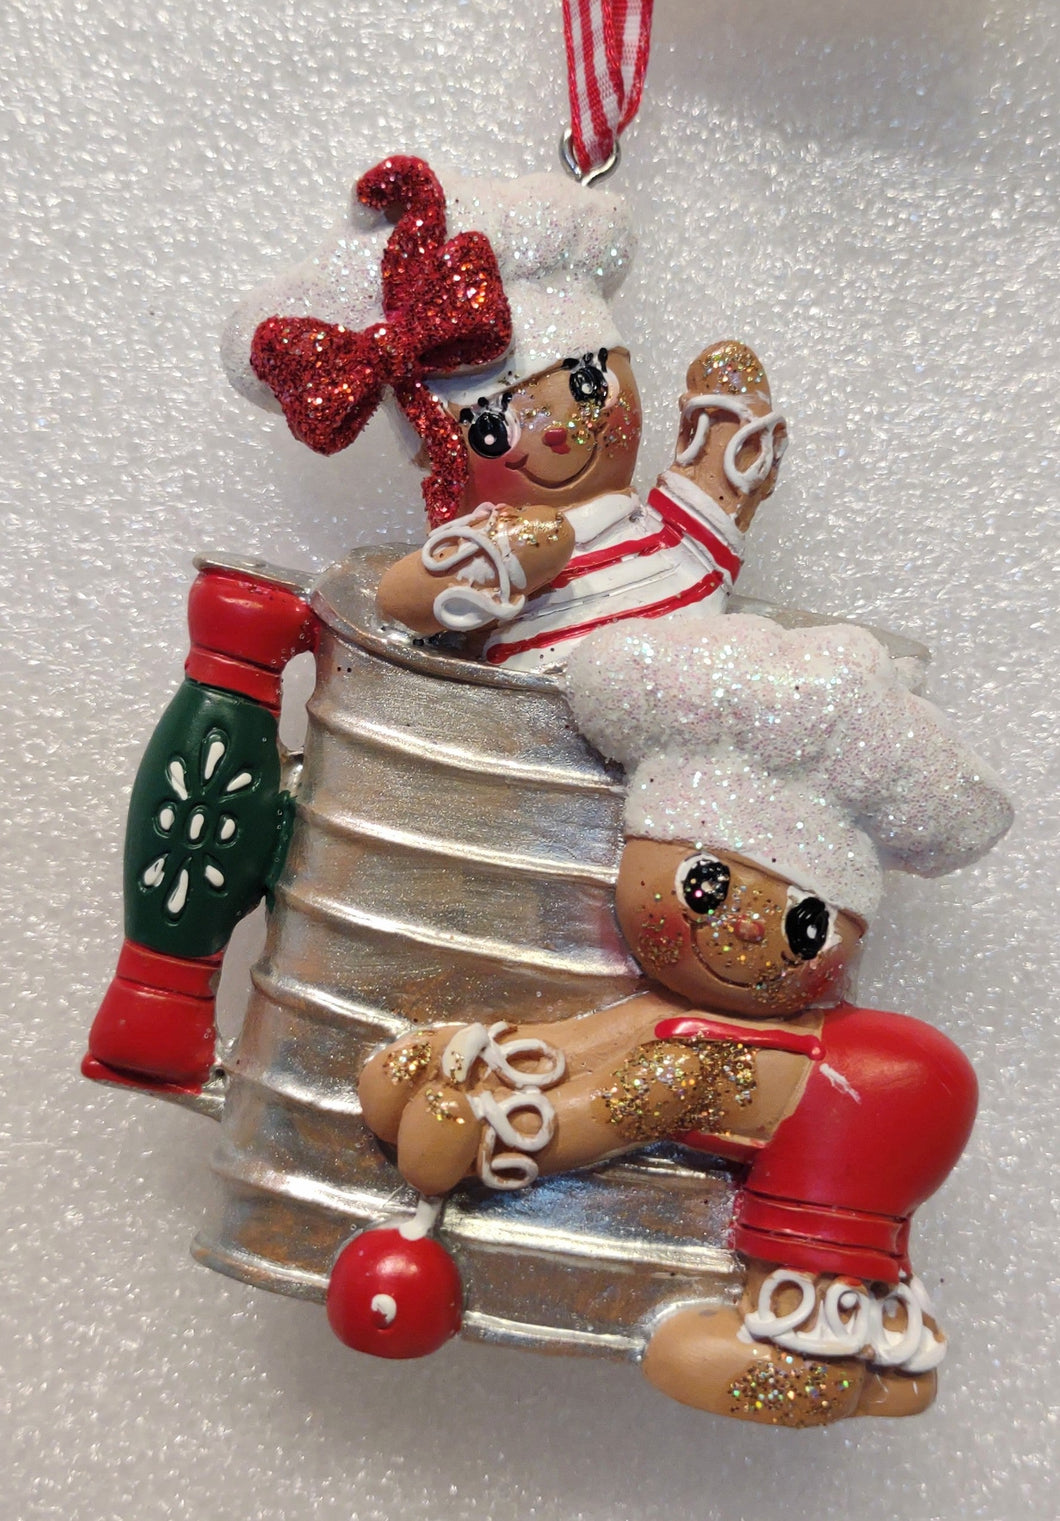 Gingerbread Chef Ornament with Silver Sifter